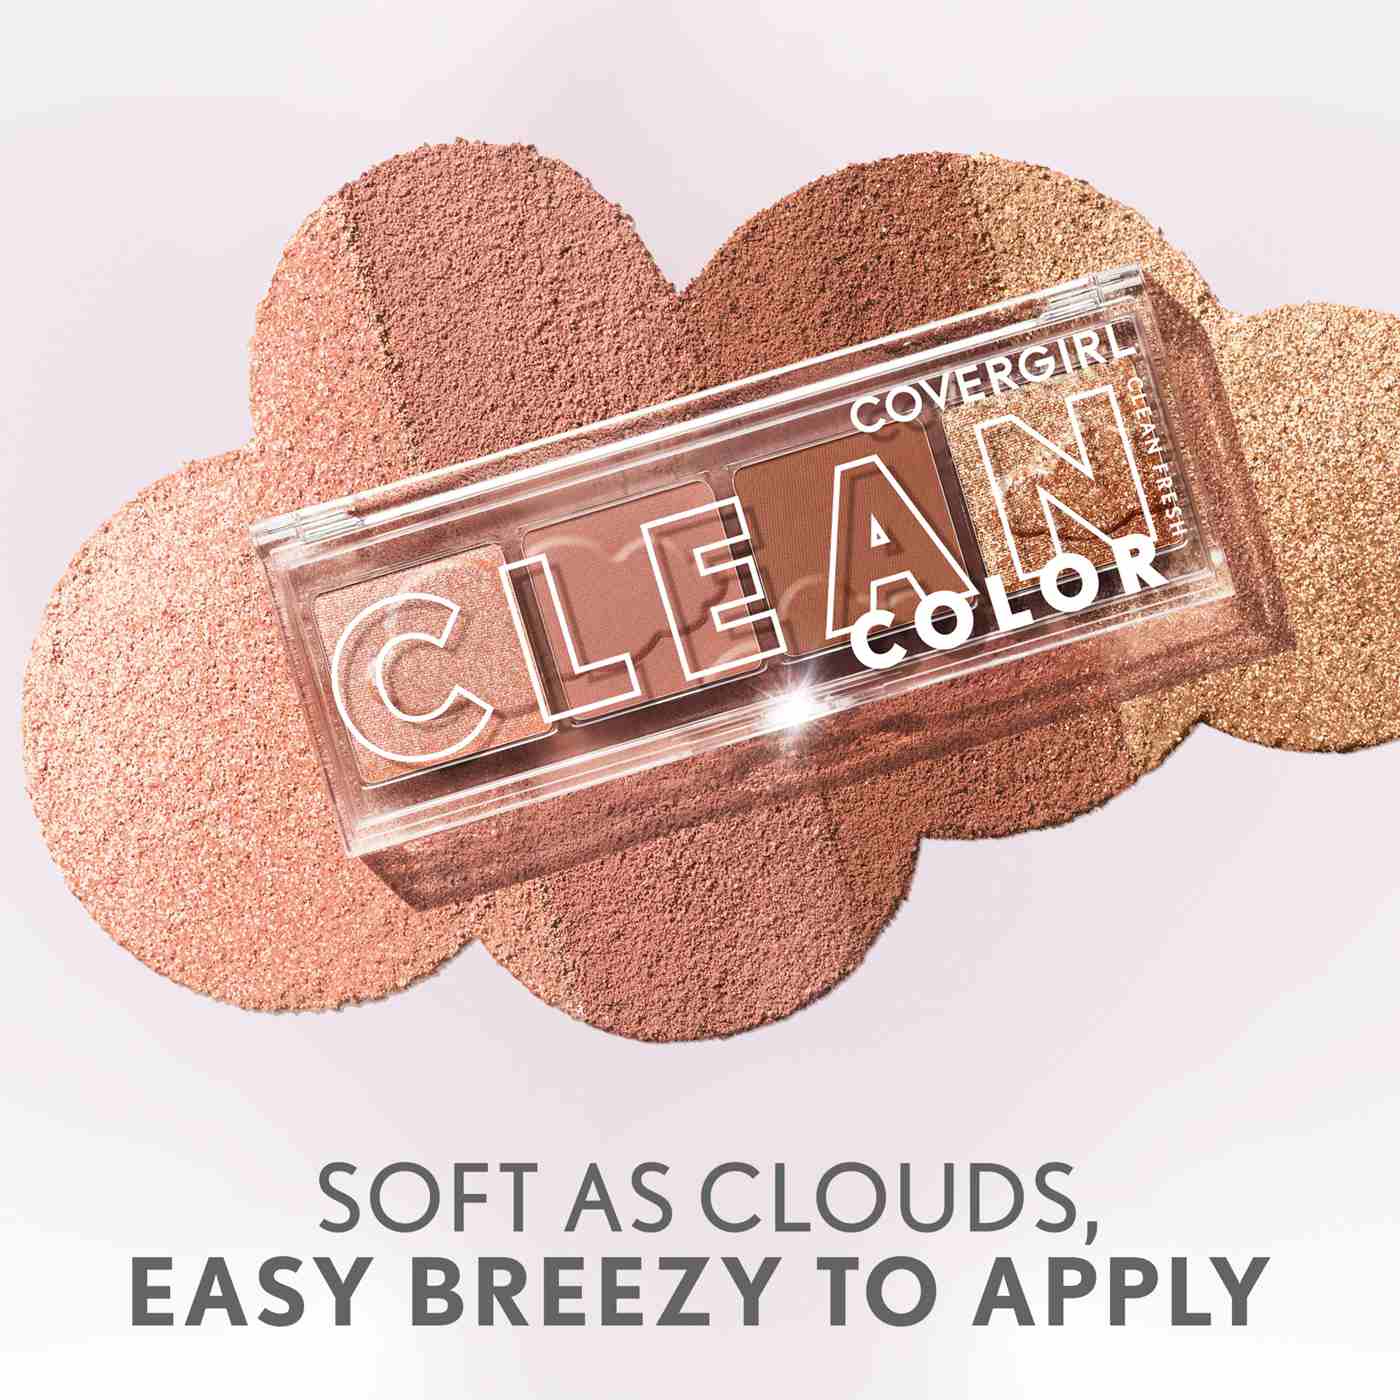 Covergirl Clean Fresh Color Eyeshadow - Cool Berry; image 8 of 10